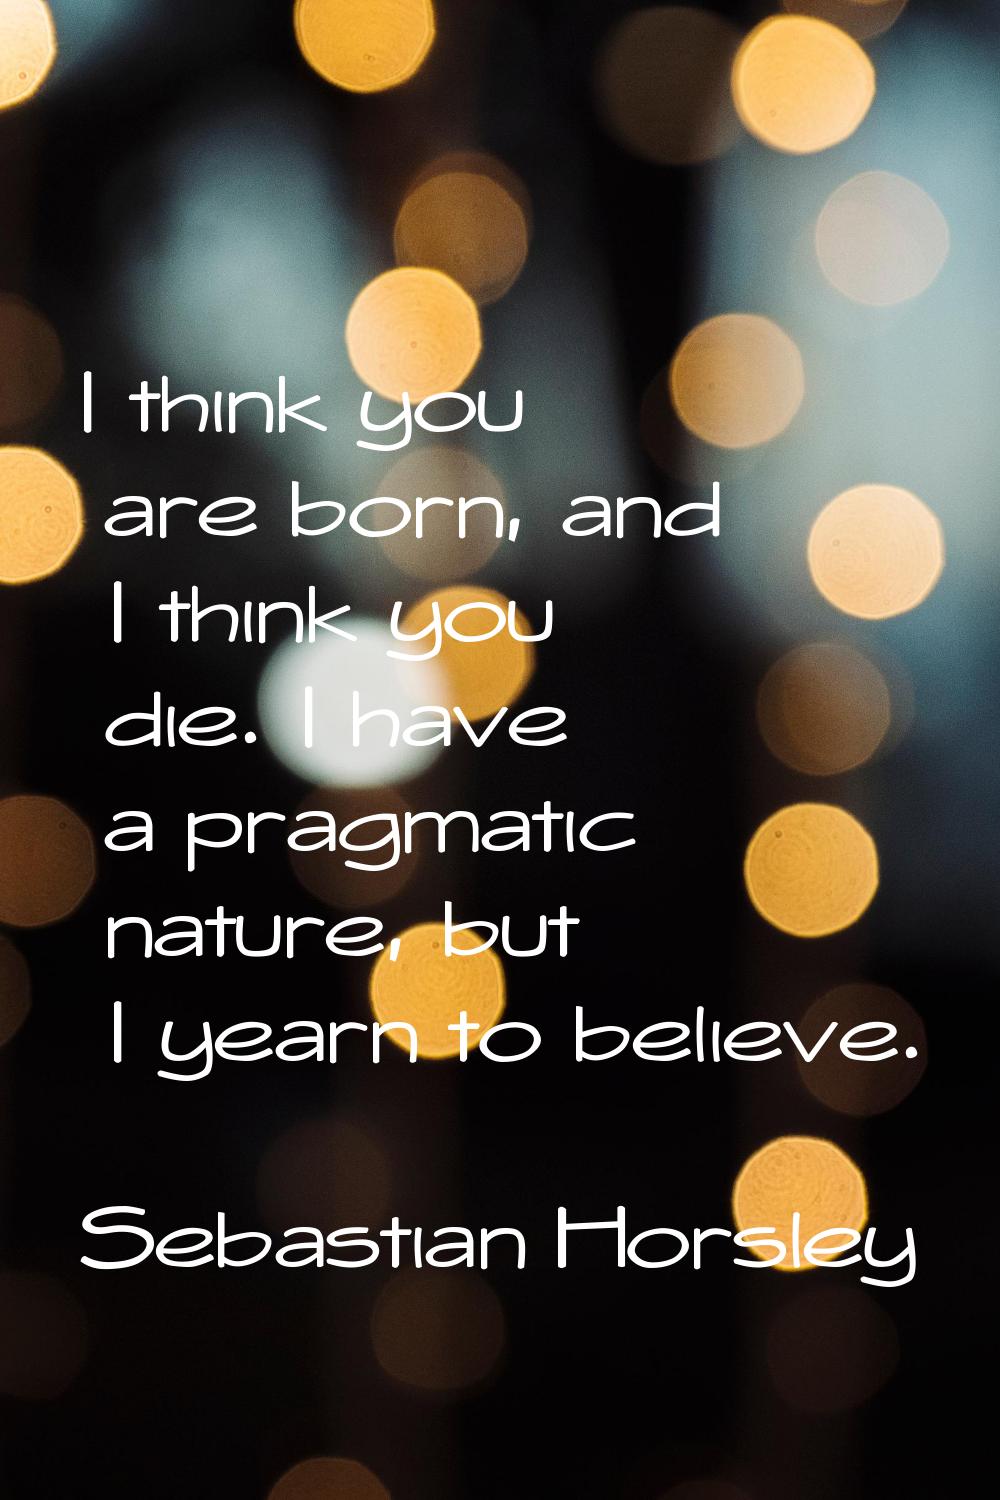 I think you are born, and I think you die. I have a pragmatic nature, but I yearn to believe.